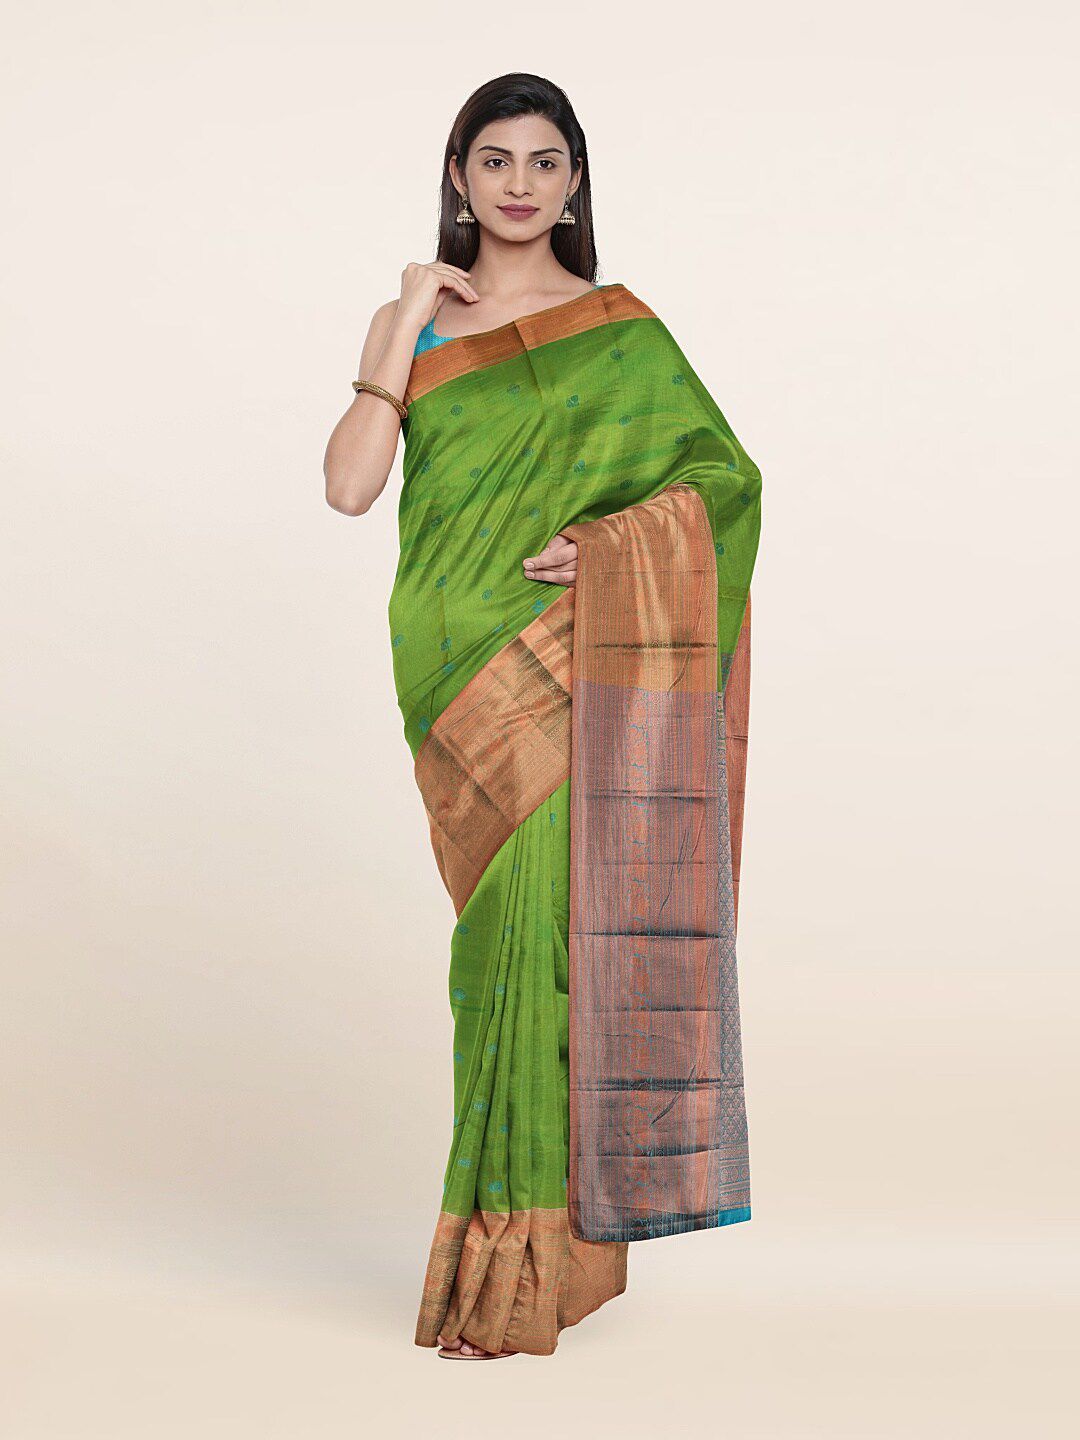 Pothys Green & Turquoise Blue Woven Design Pure Silk Saree Price in India